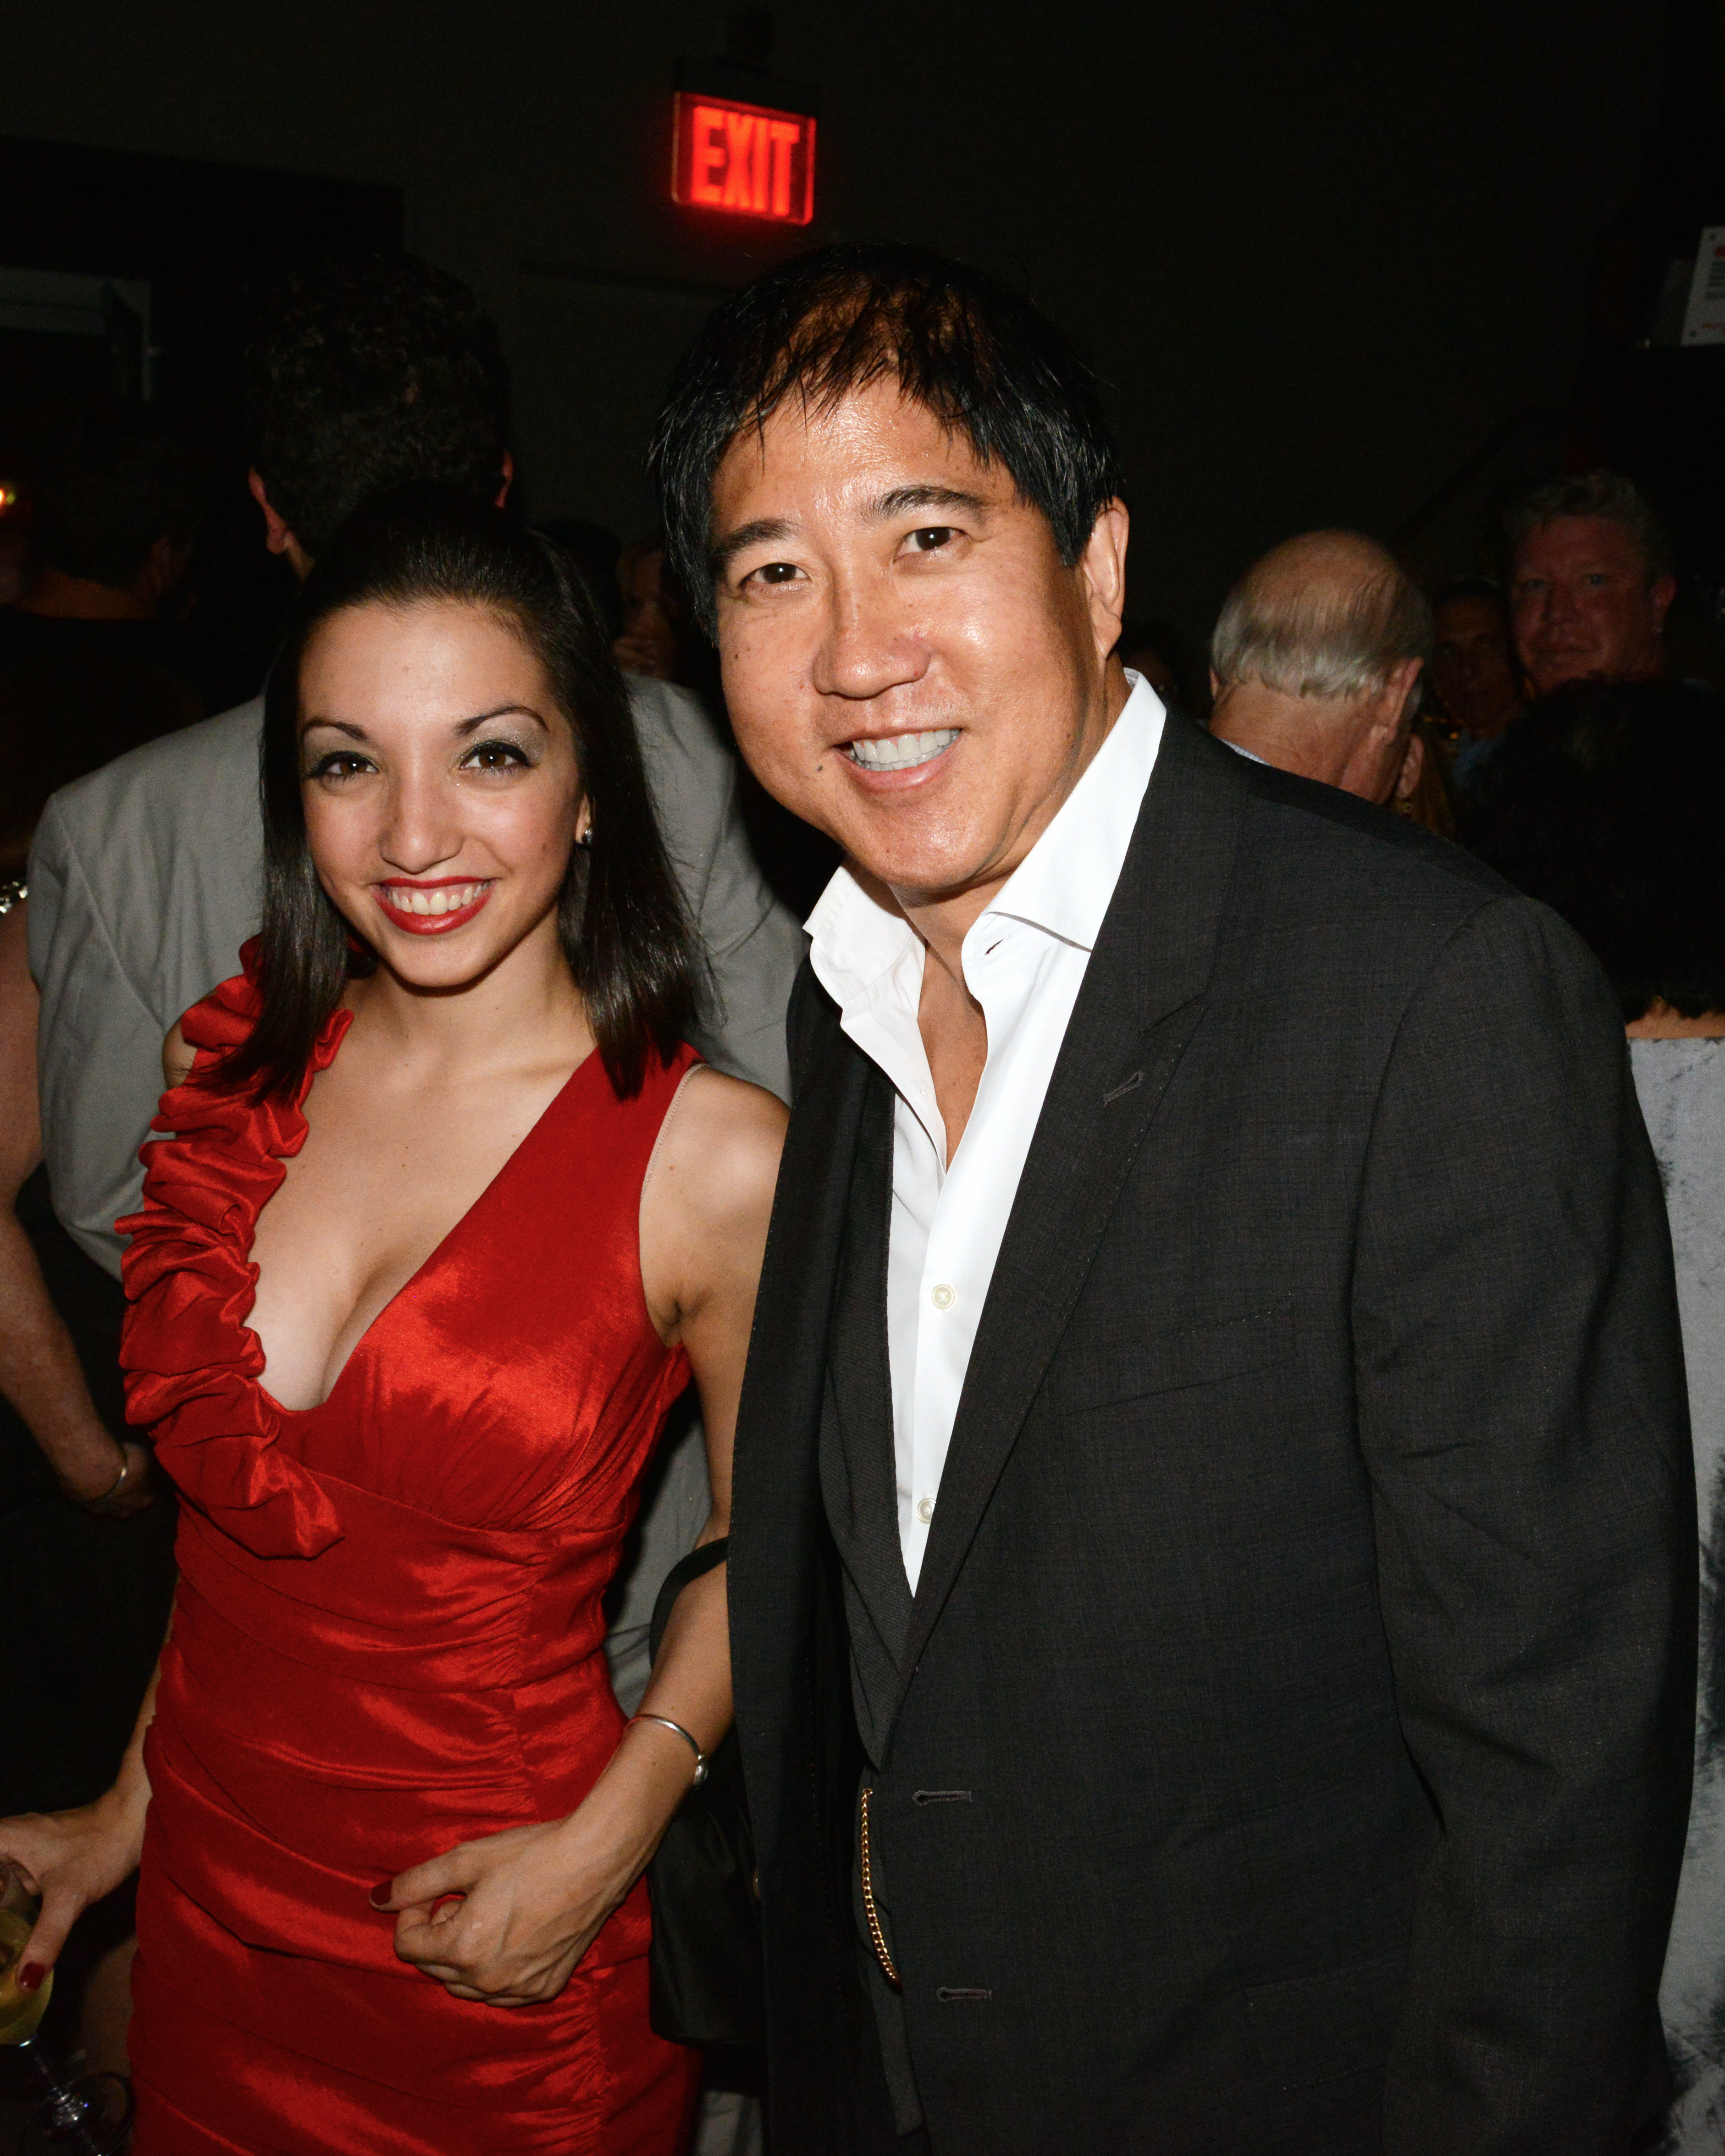 Stephen Mao-Julia Macchio, the daughter of Karate Kid master Ralph Macchio at the premiere of Girl Most Likely in New York.